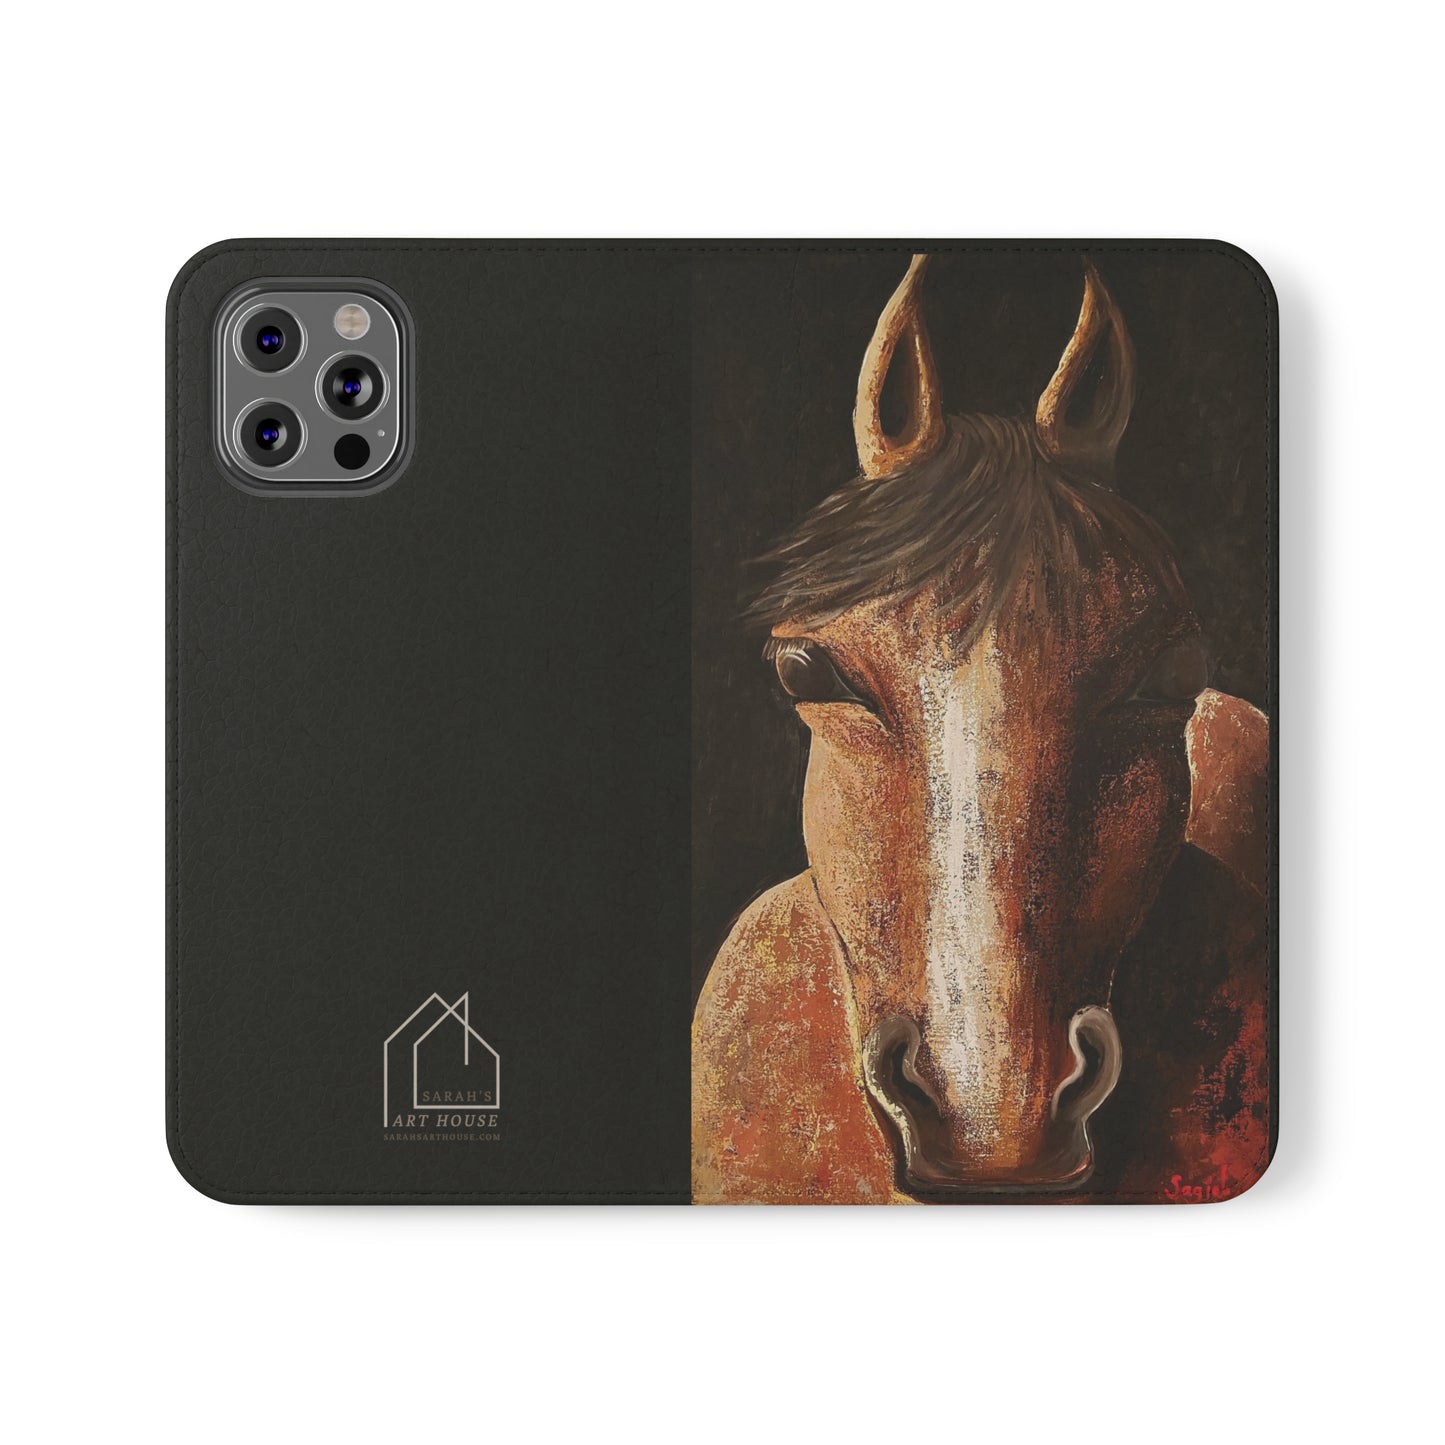 Phone Flip Cases - Wallet Phone case - Phone case with Wallet - Equestrian - Nigel